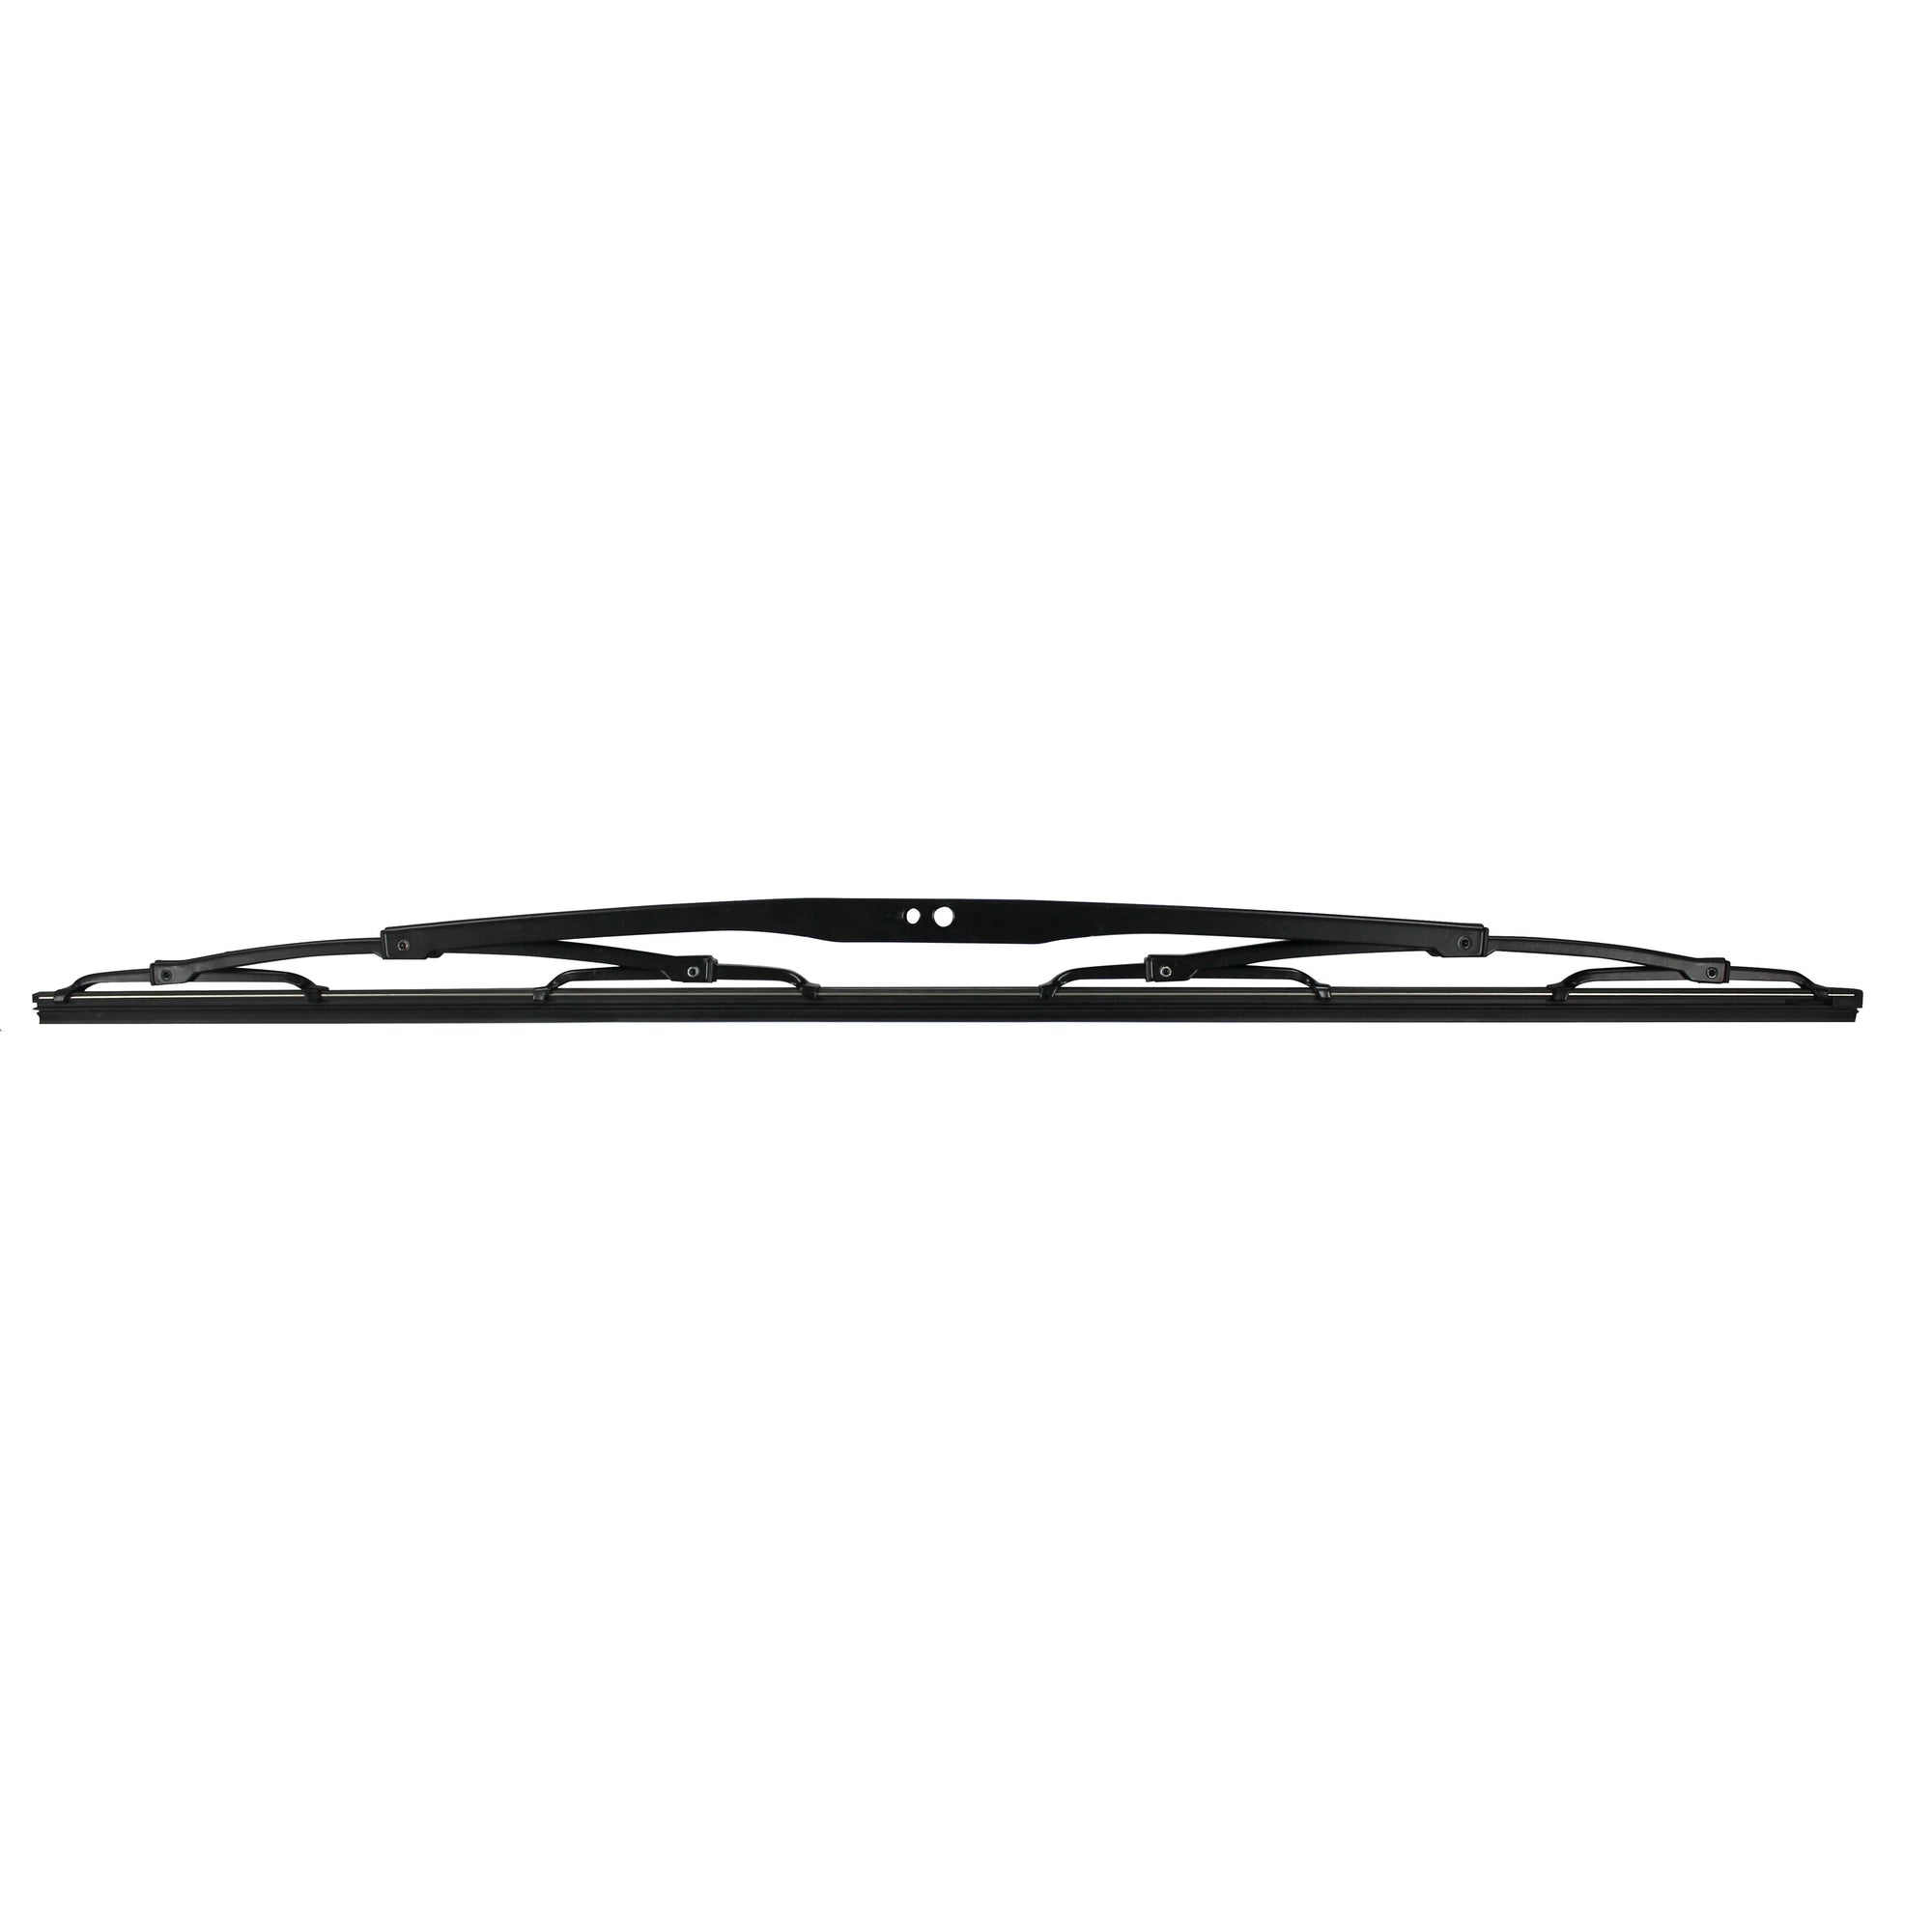 Wiper Technologies WT1-22 Universal Blade Assembly - 22 in.